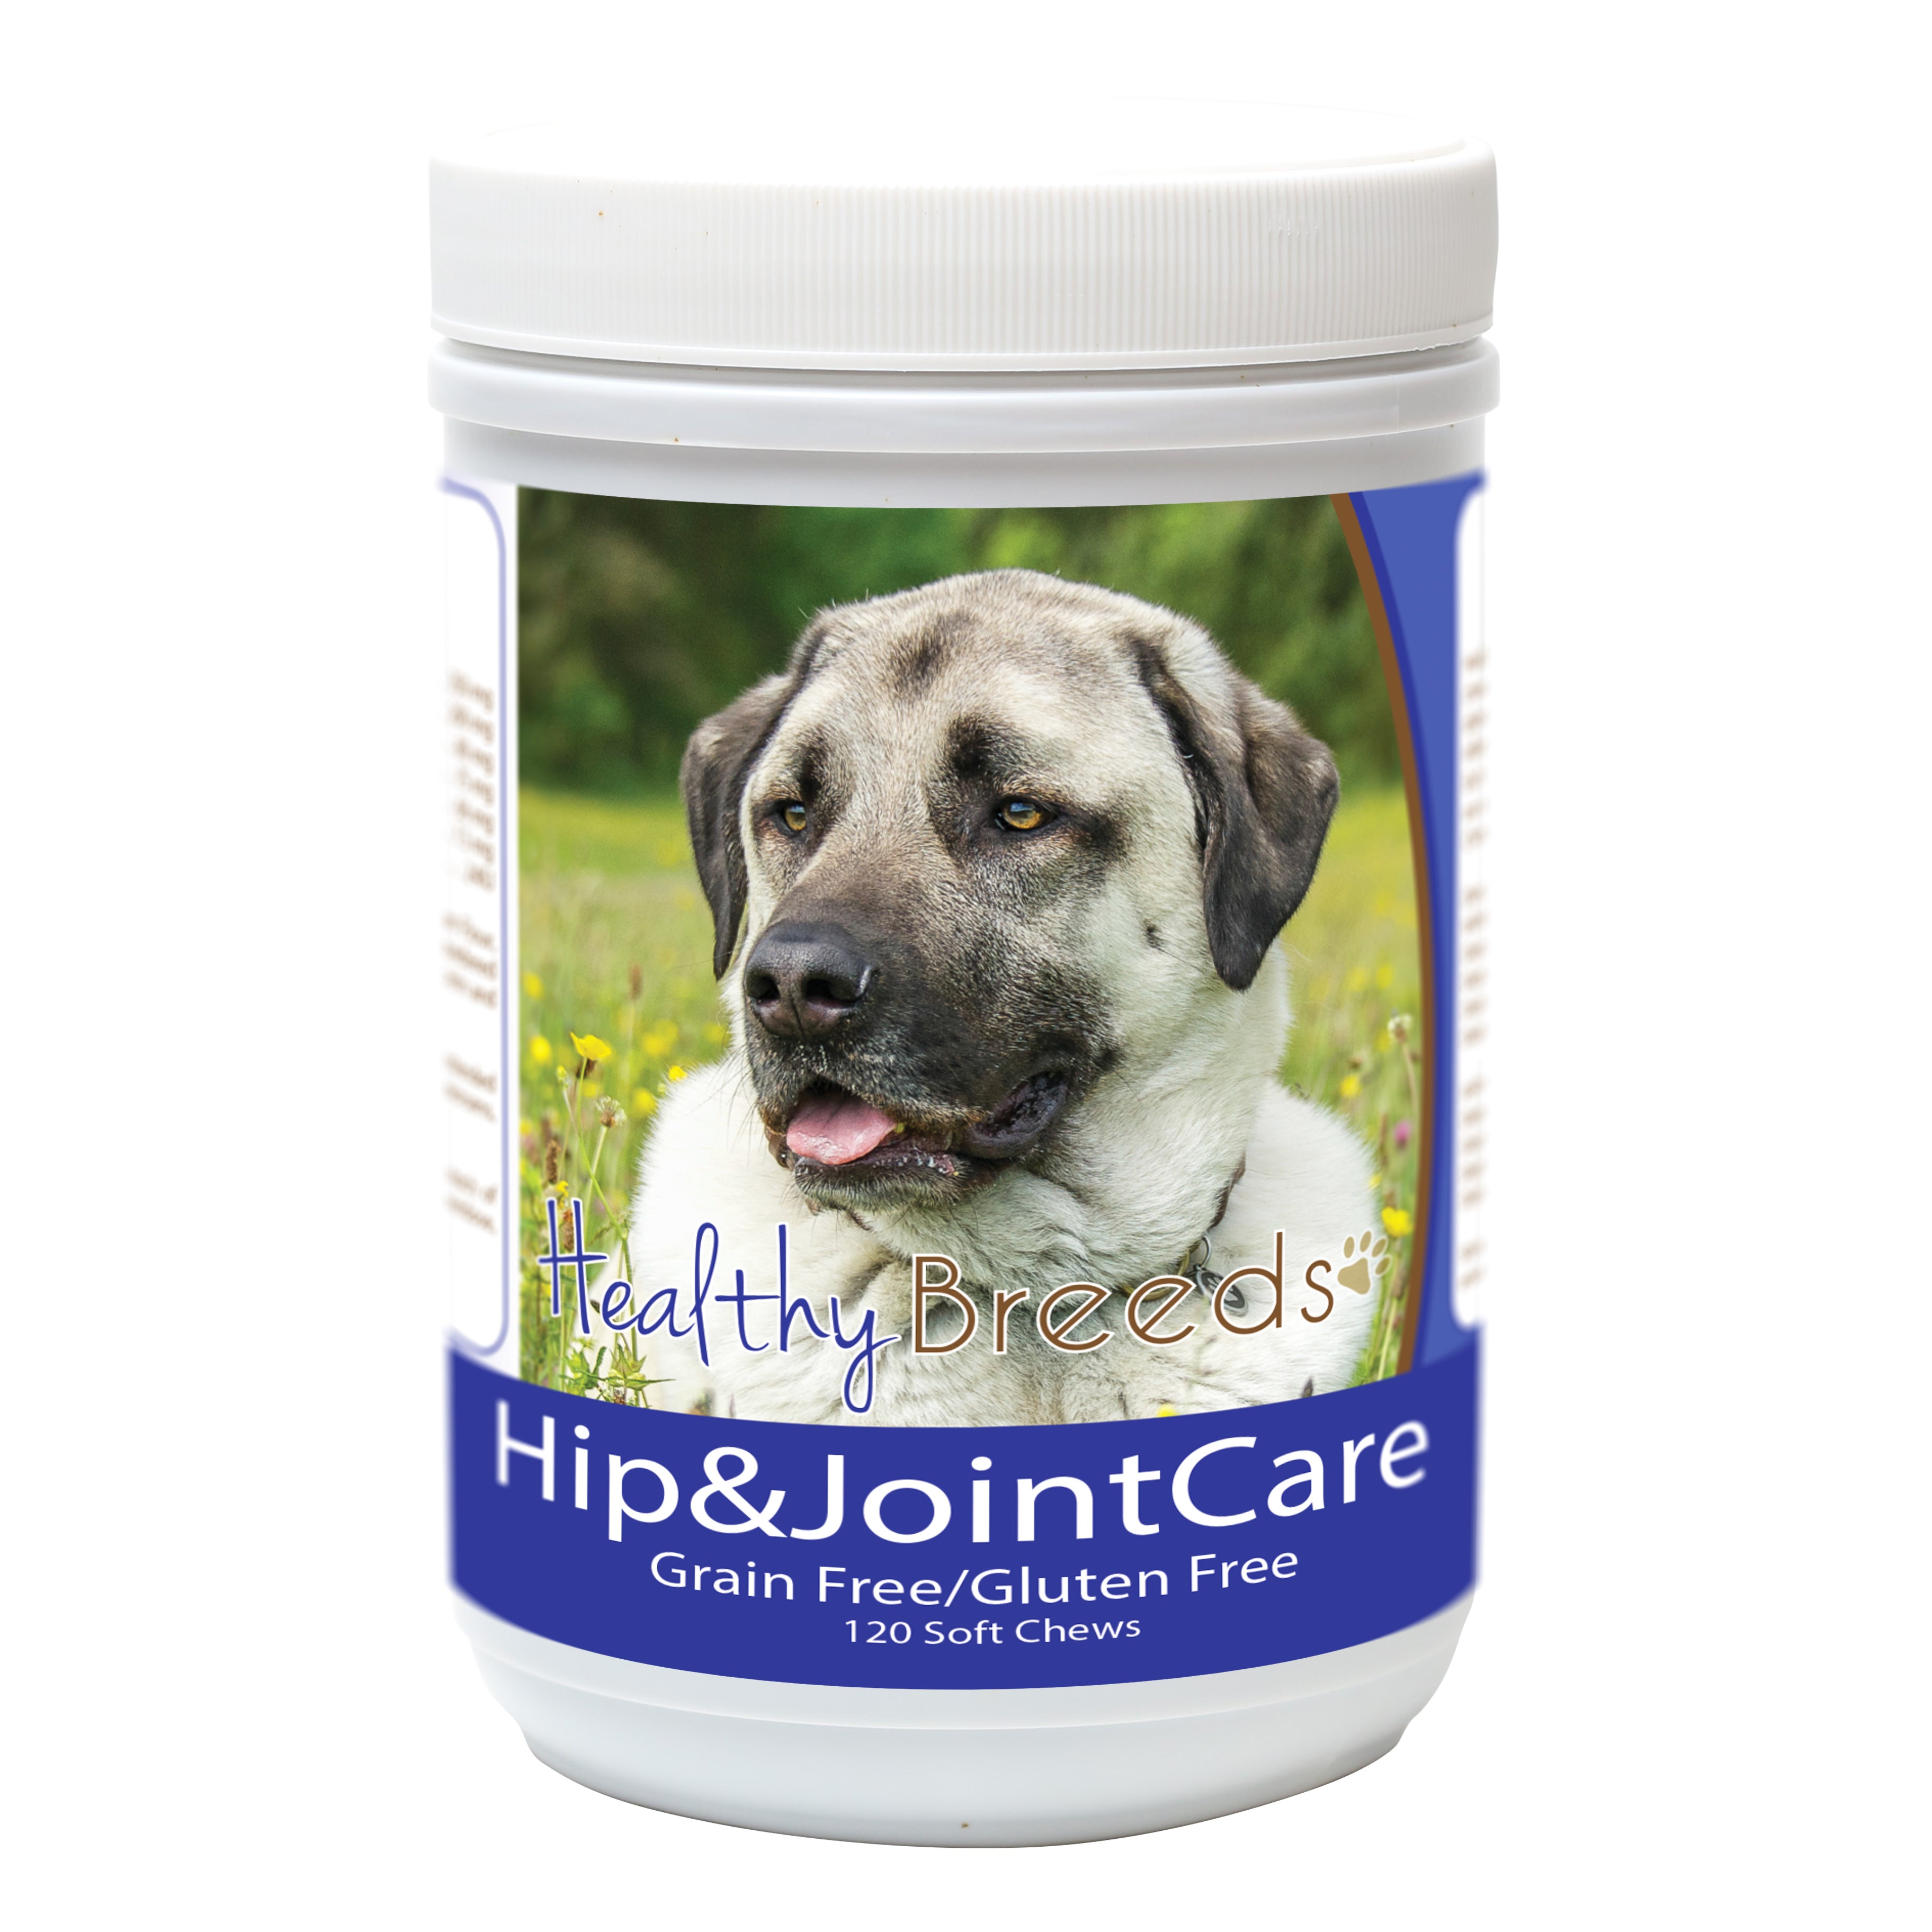 Anatolian Shepherd Dog Hip and Joint Care 120 Count